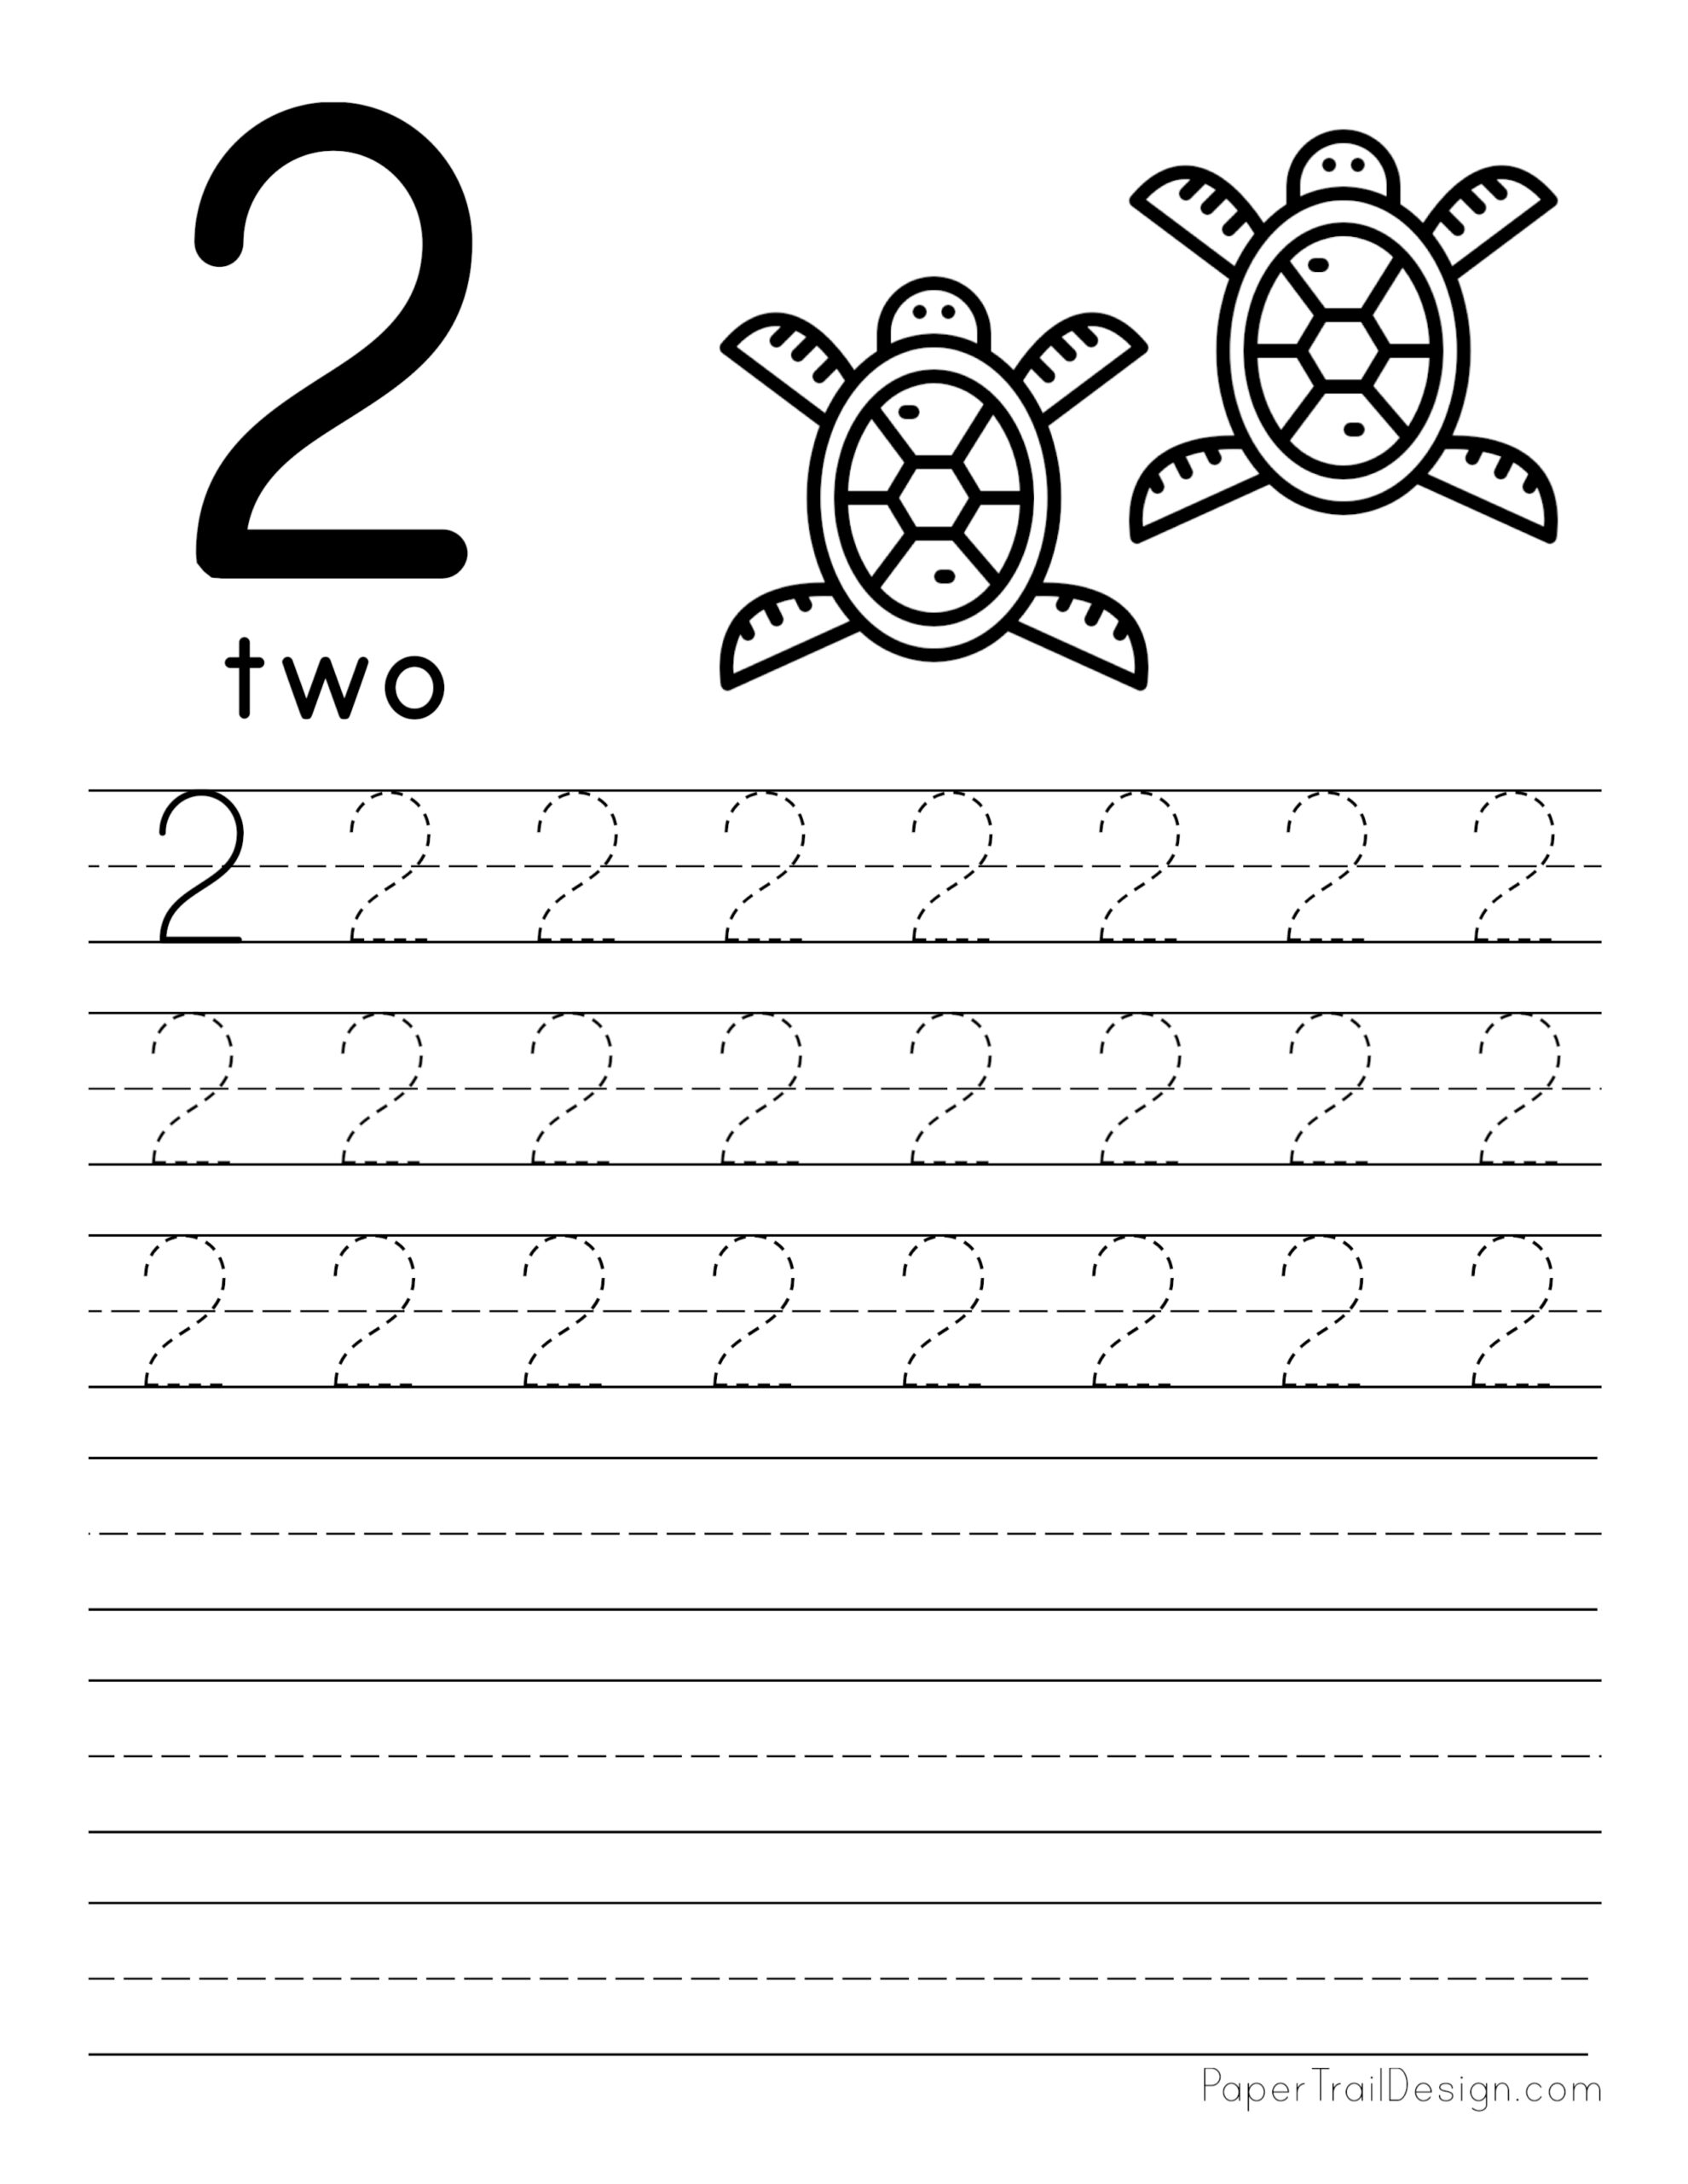 trace-number-2-eng-png-1-115-1-637-pixels-numbers-preschool-tracing